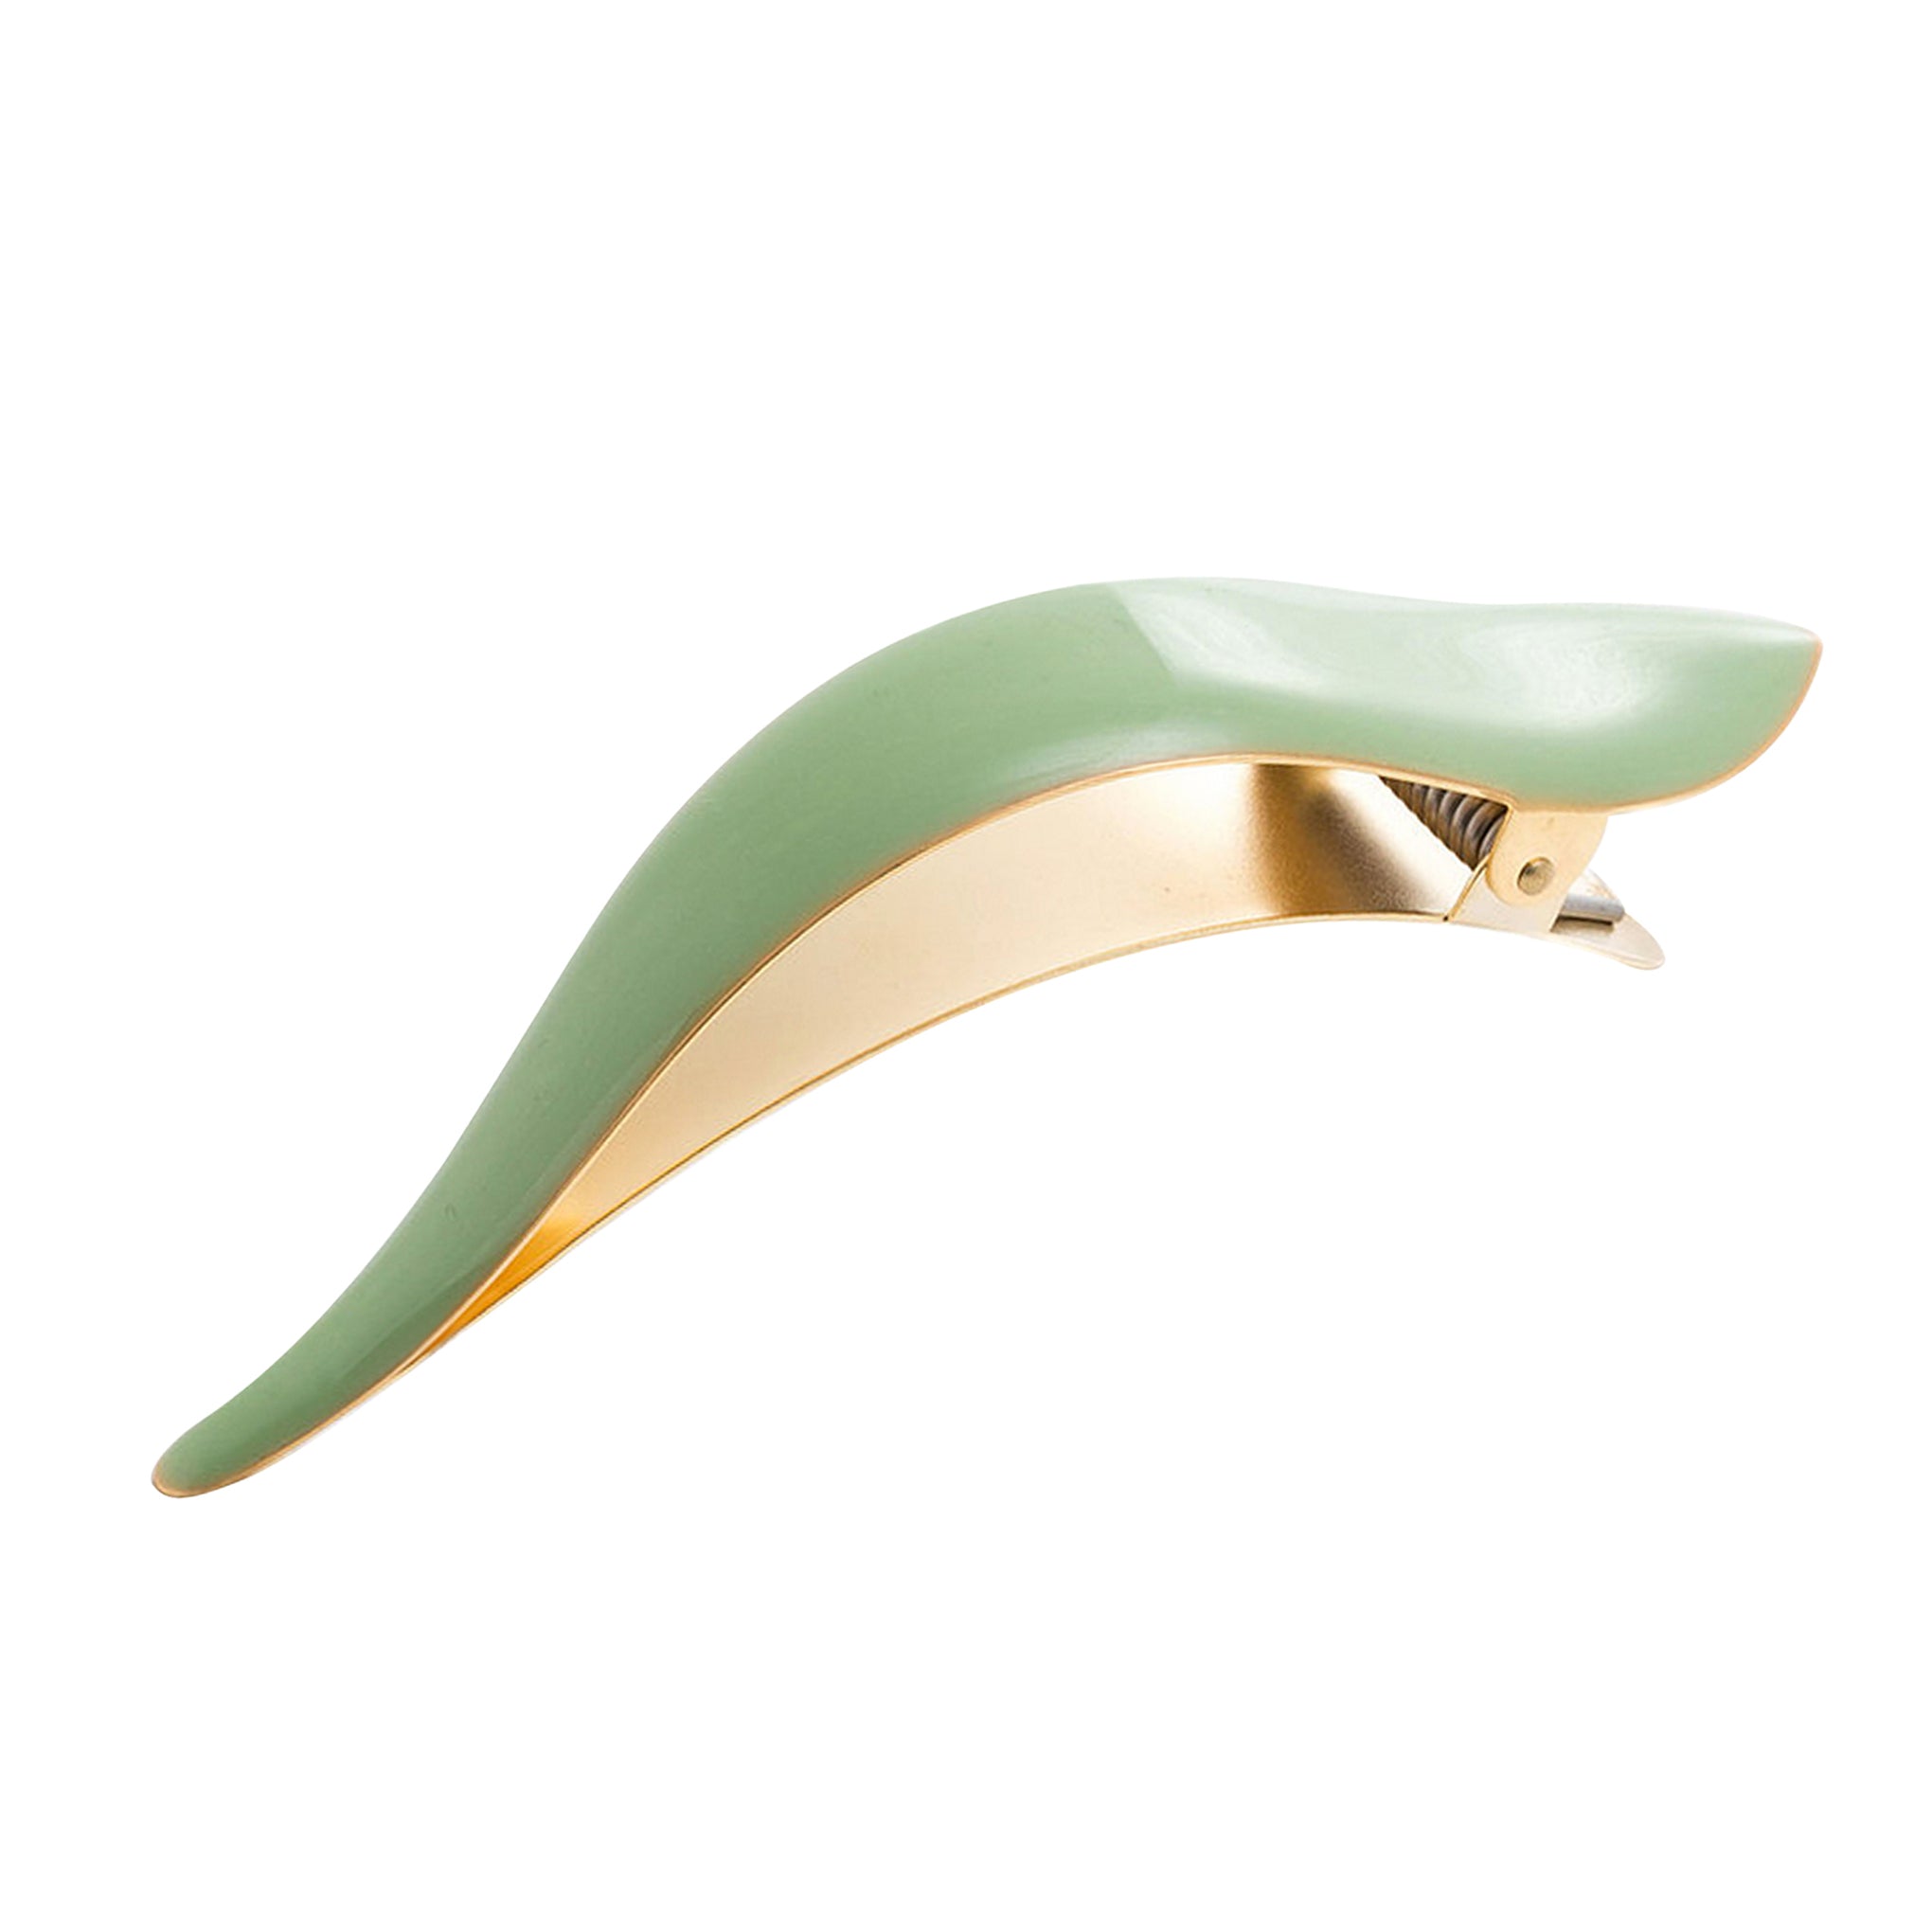 Ficcare Maximas Hair Clip in Sahara Agave Green Enamel and Gold Plated